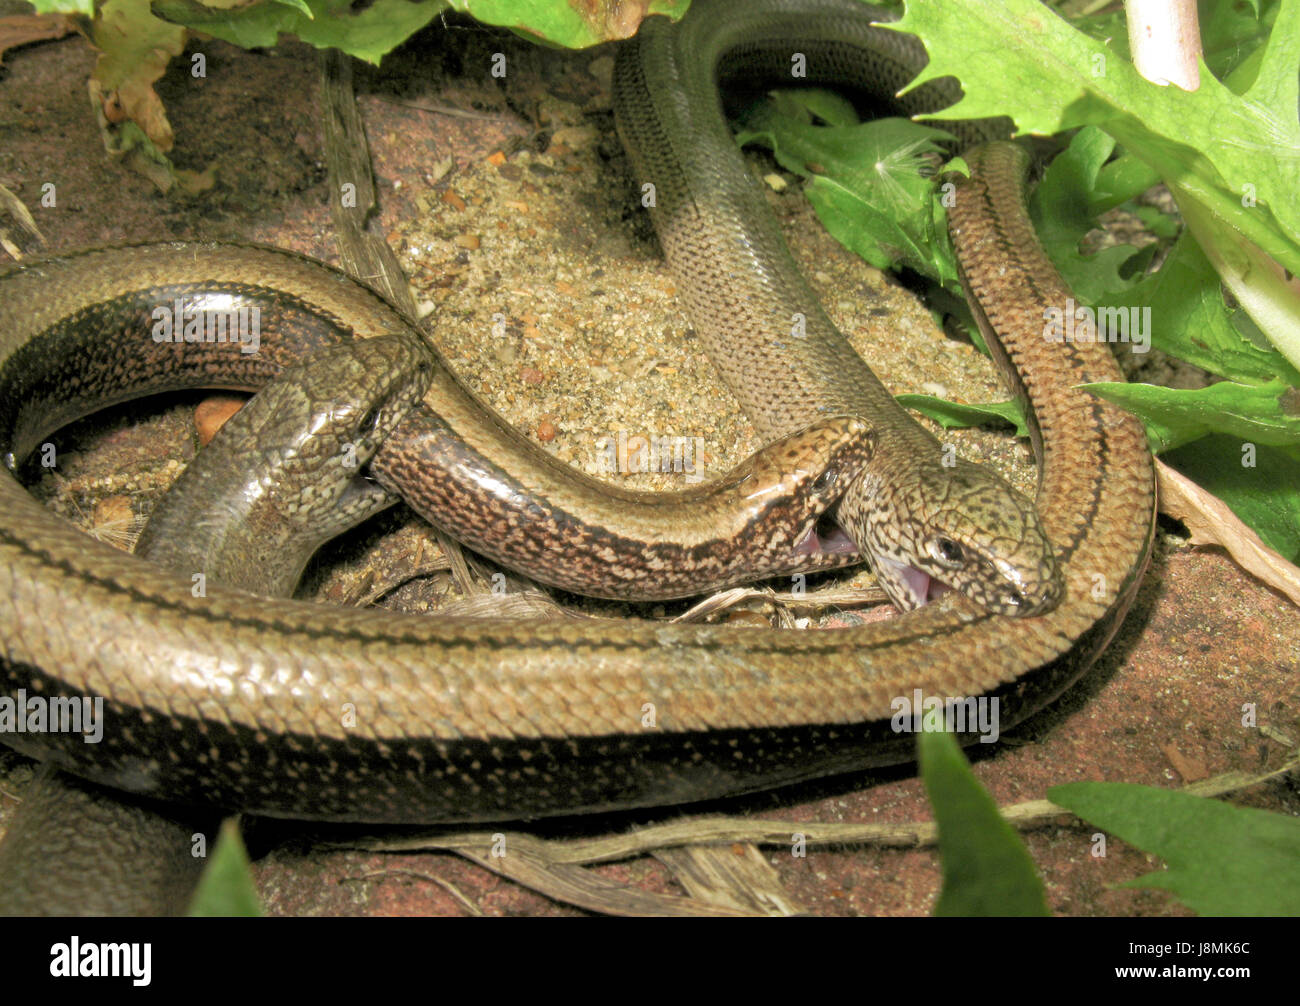 The Biter Bitten! Slow worm Courtship & Mating (Anguis fragilis) Males biting female who bites back! 1 of 2 Stock Photo